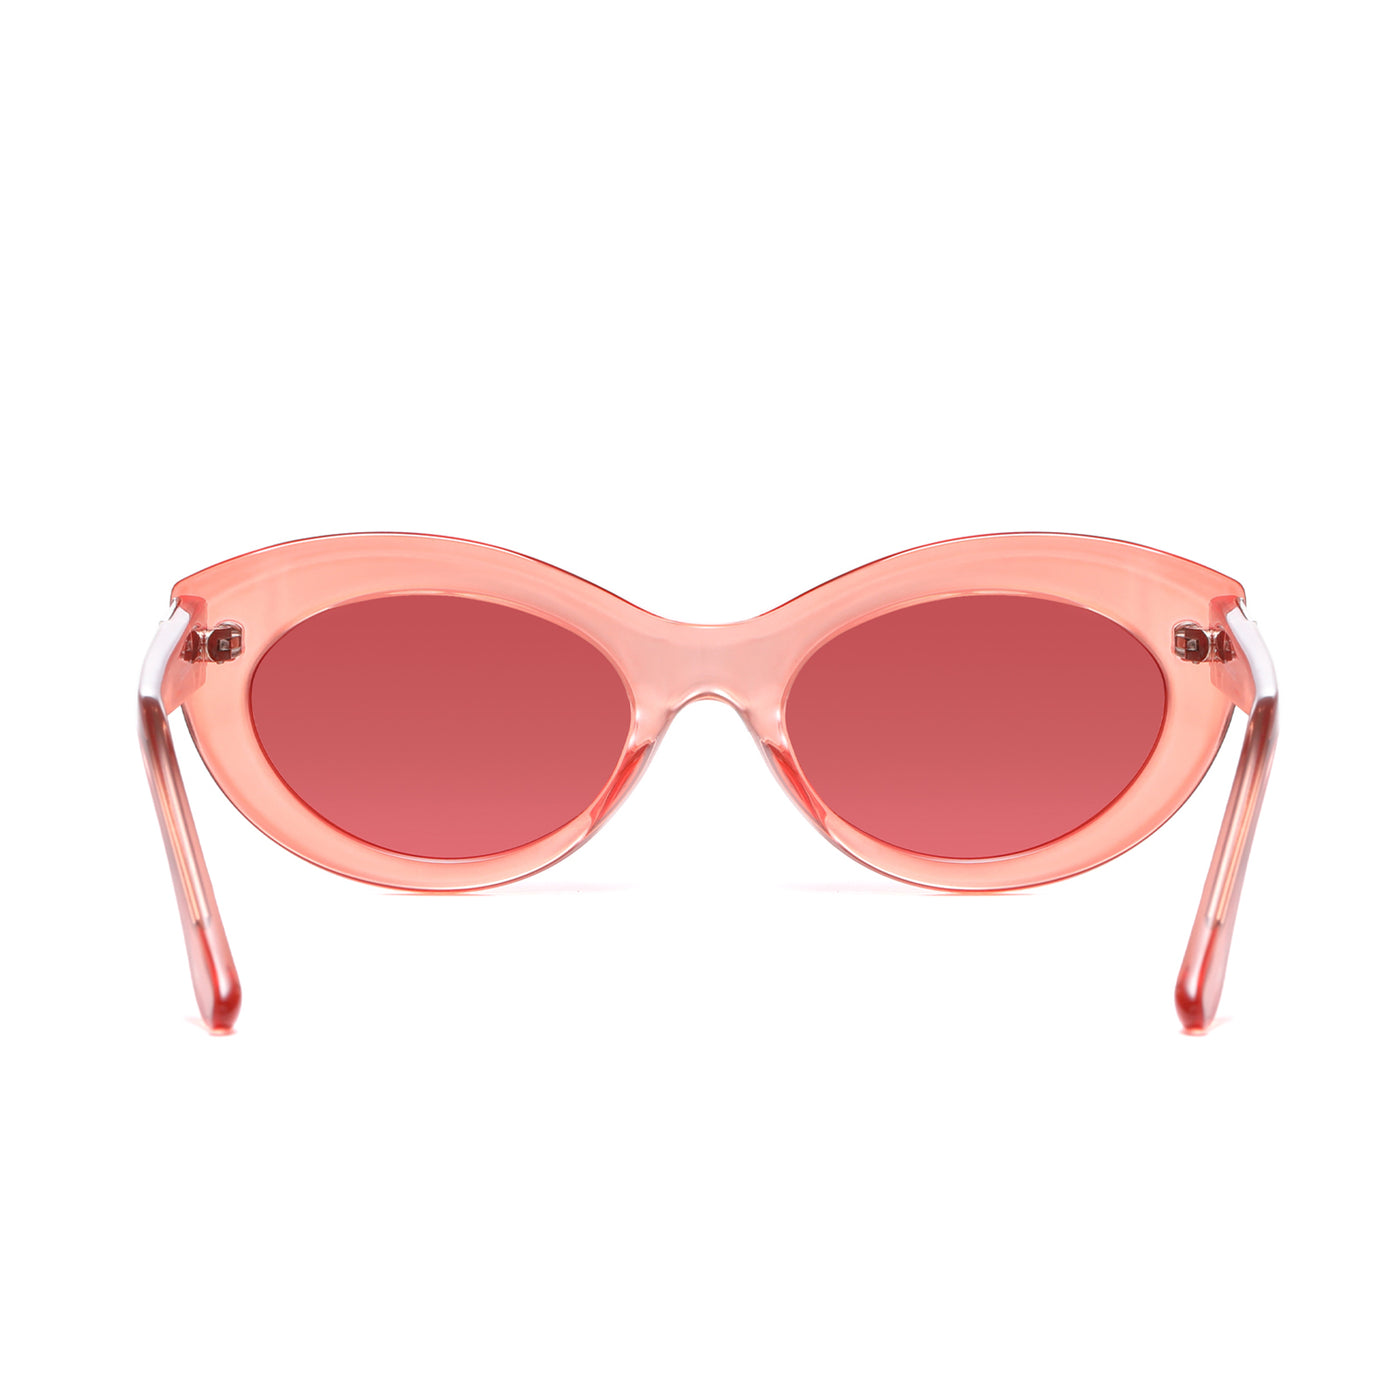 DUCO GLASSES-The right kind of shady Jolene Duco Women